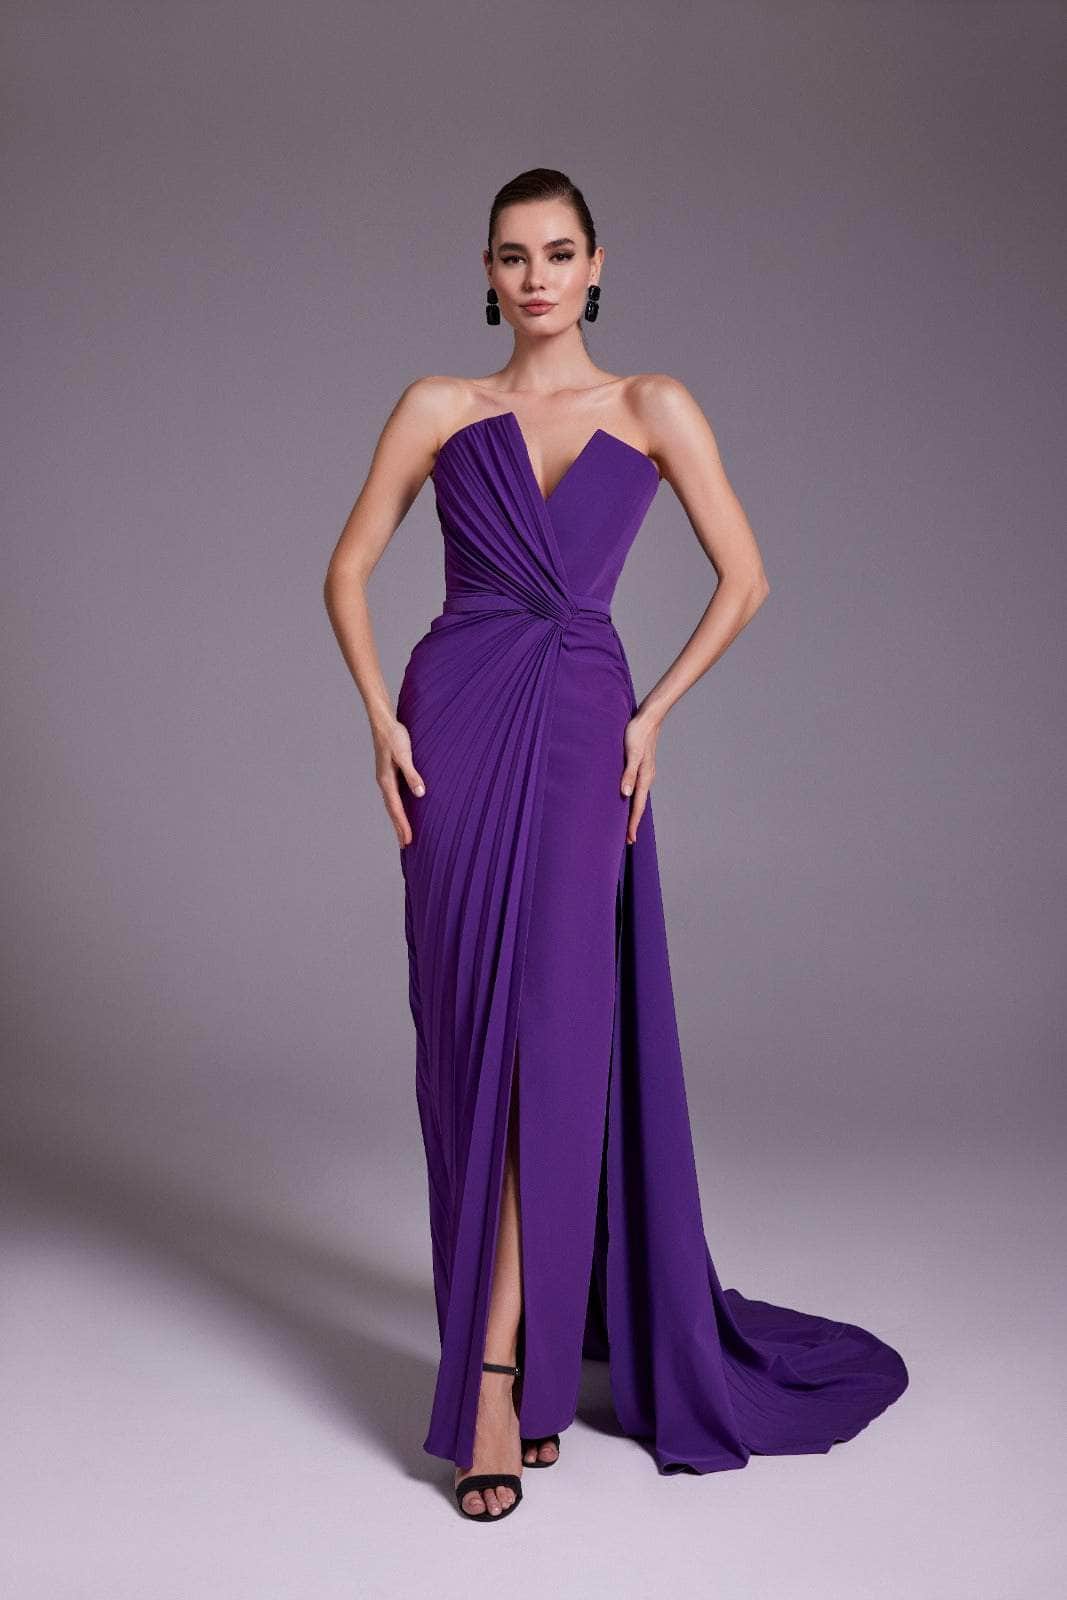 MNM Couture N0532 - Strapless V-Neck Crepe Gown
